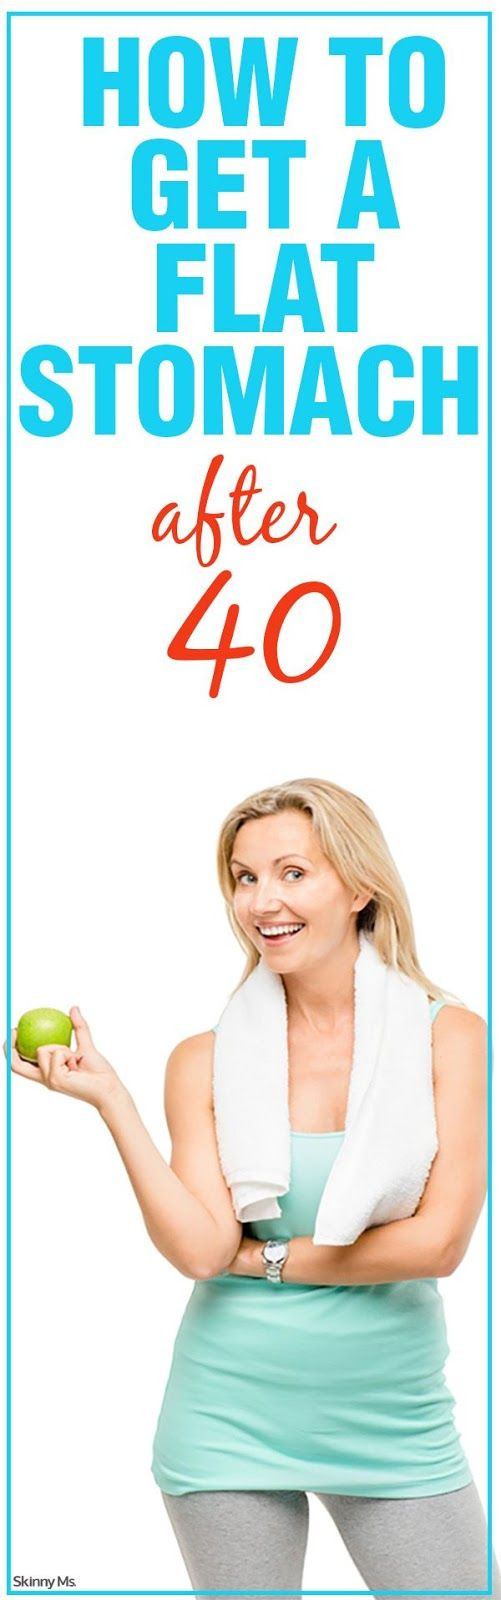 How To Lose Weight Over 40
 17 Best images about Women Over 40 Losing Weight on